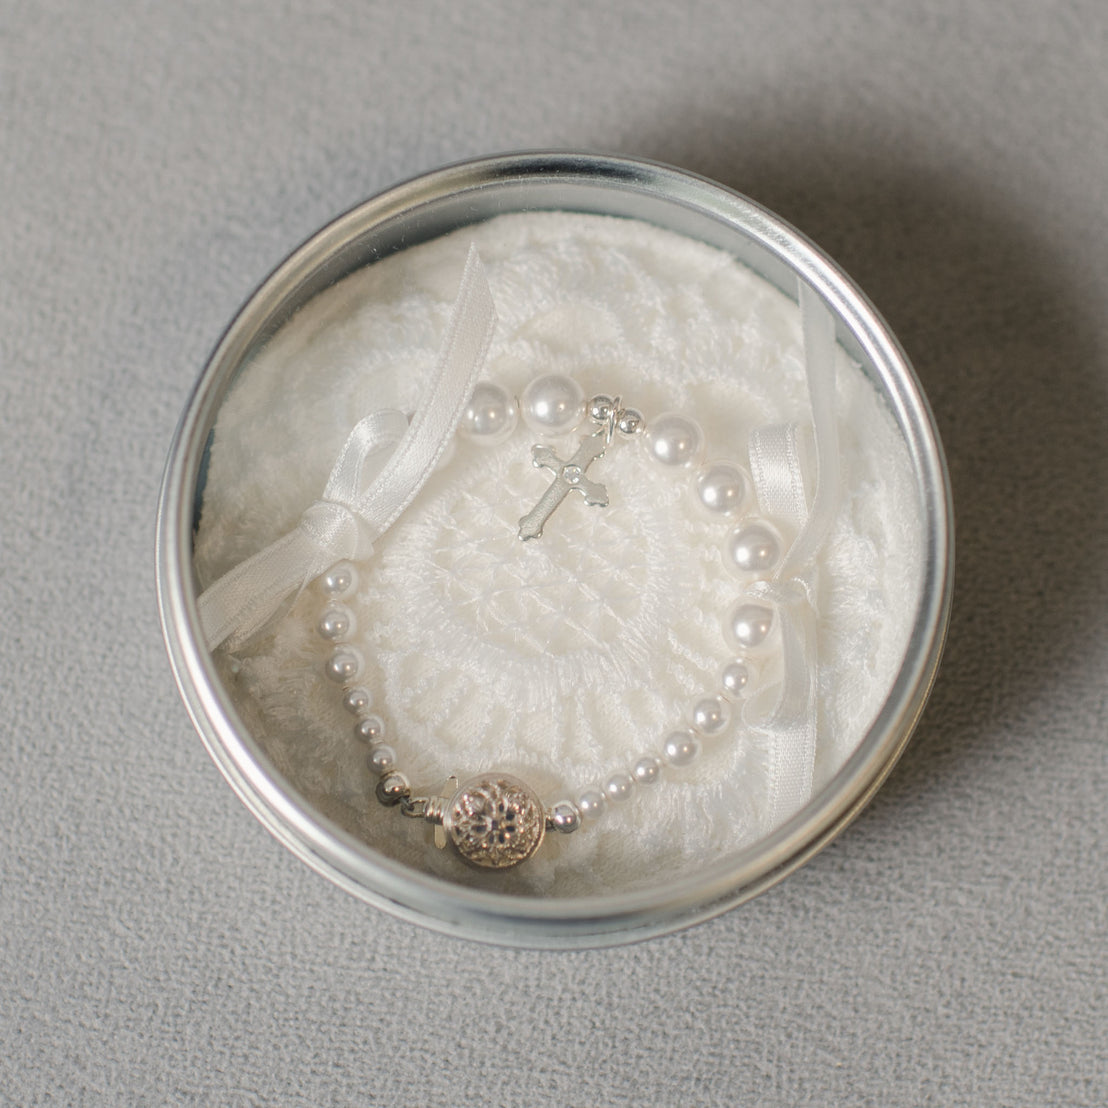 A White Luster Pearl Bracelet with Silver Cross charm and a circular clasp, laid on a white cushion inside a silver round box.